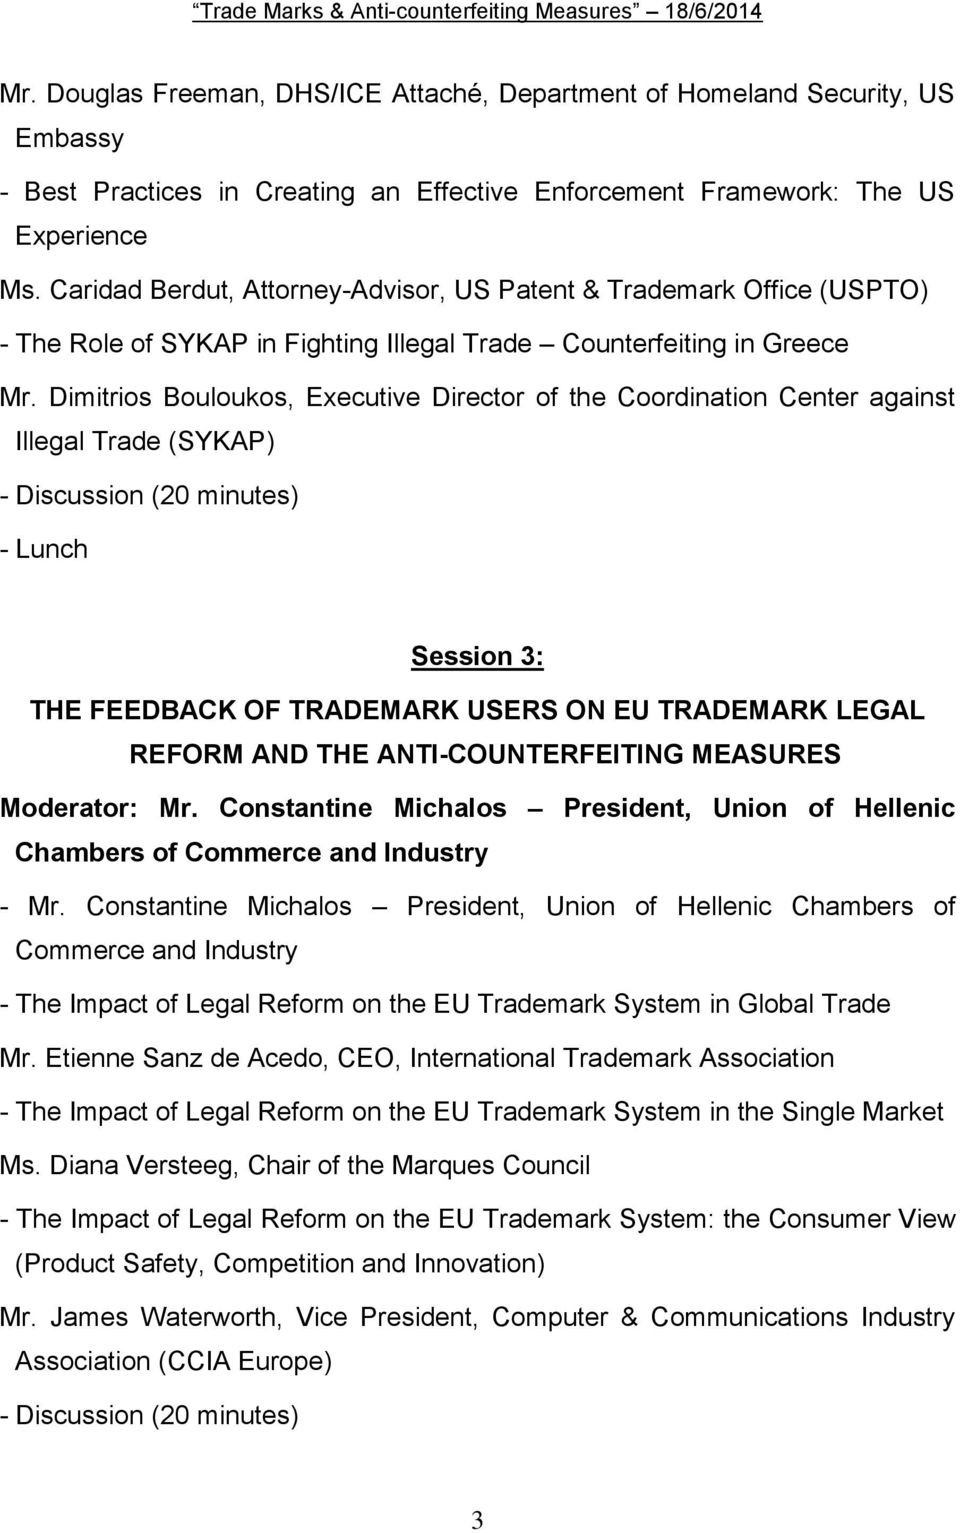 Dimitrios Bouloukos, Executive Director of the Coordination Center against Illegal Trade (SYKAP) - Discussion (20 minutes) - Lunch Session 3: THE FEEDBACK OF TRADEMARK USERS ON EU TRADEMARK LEGAL